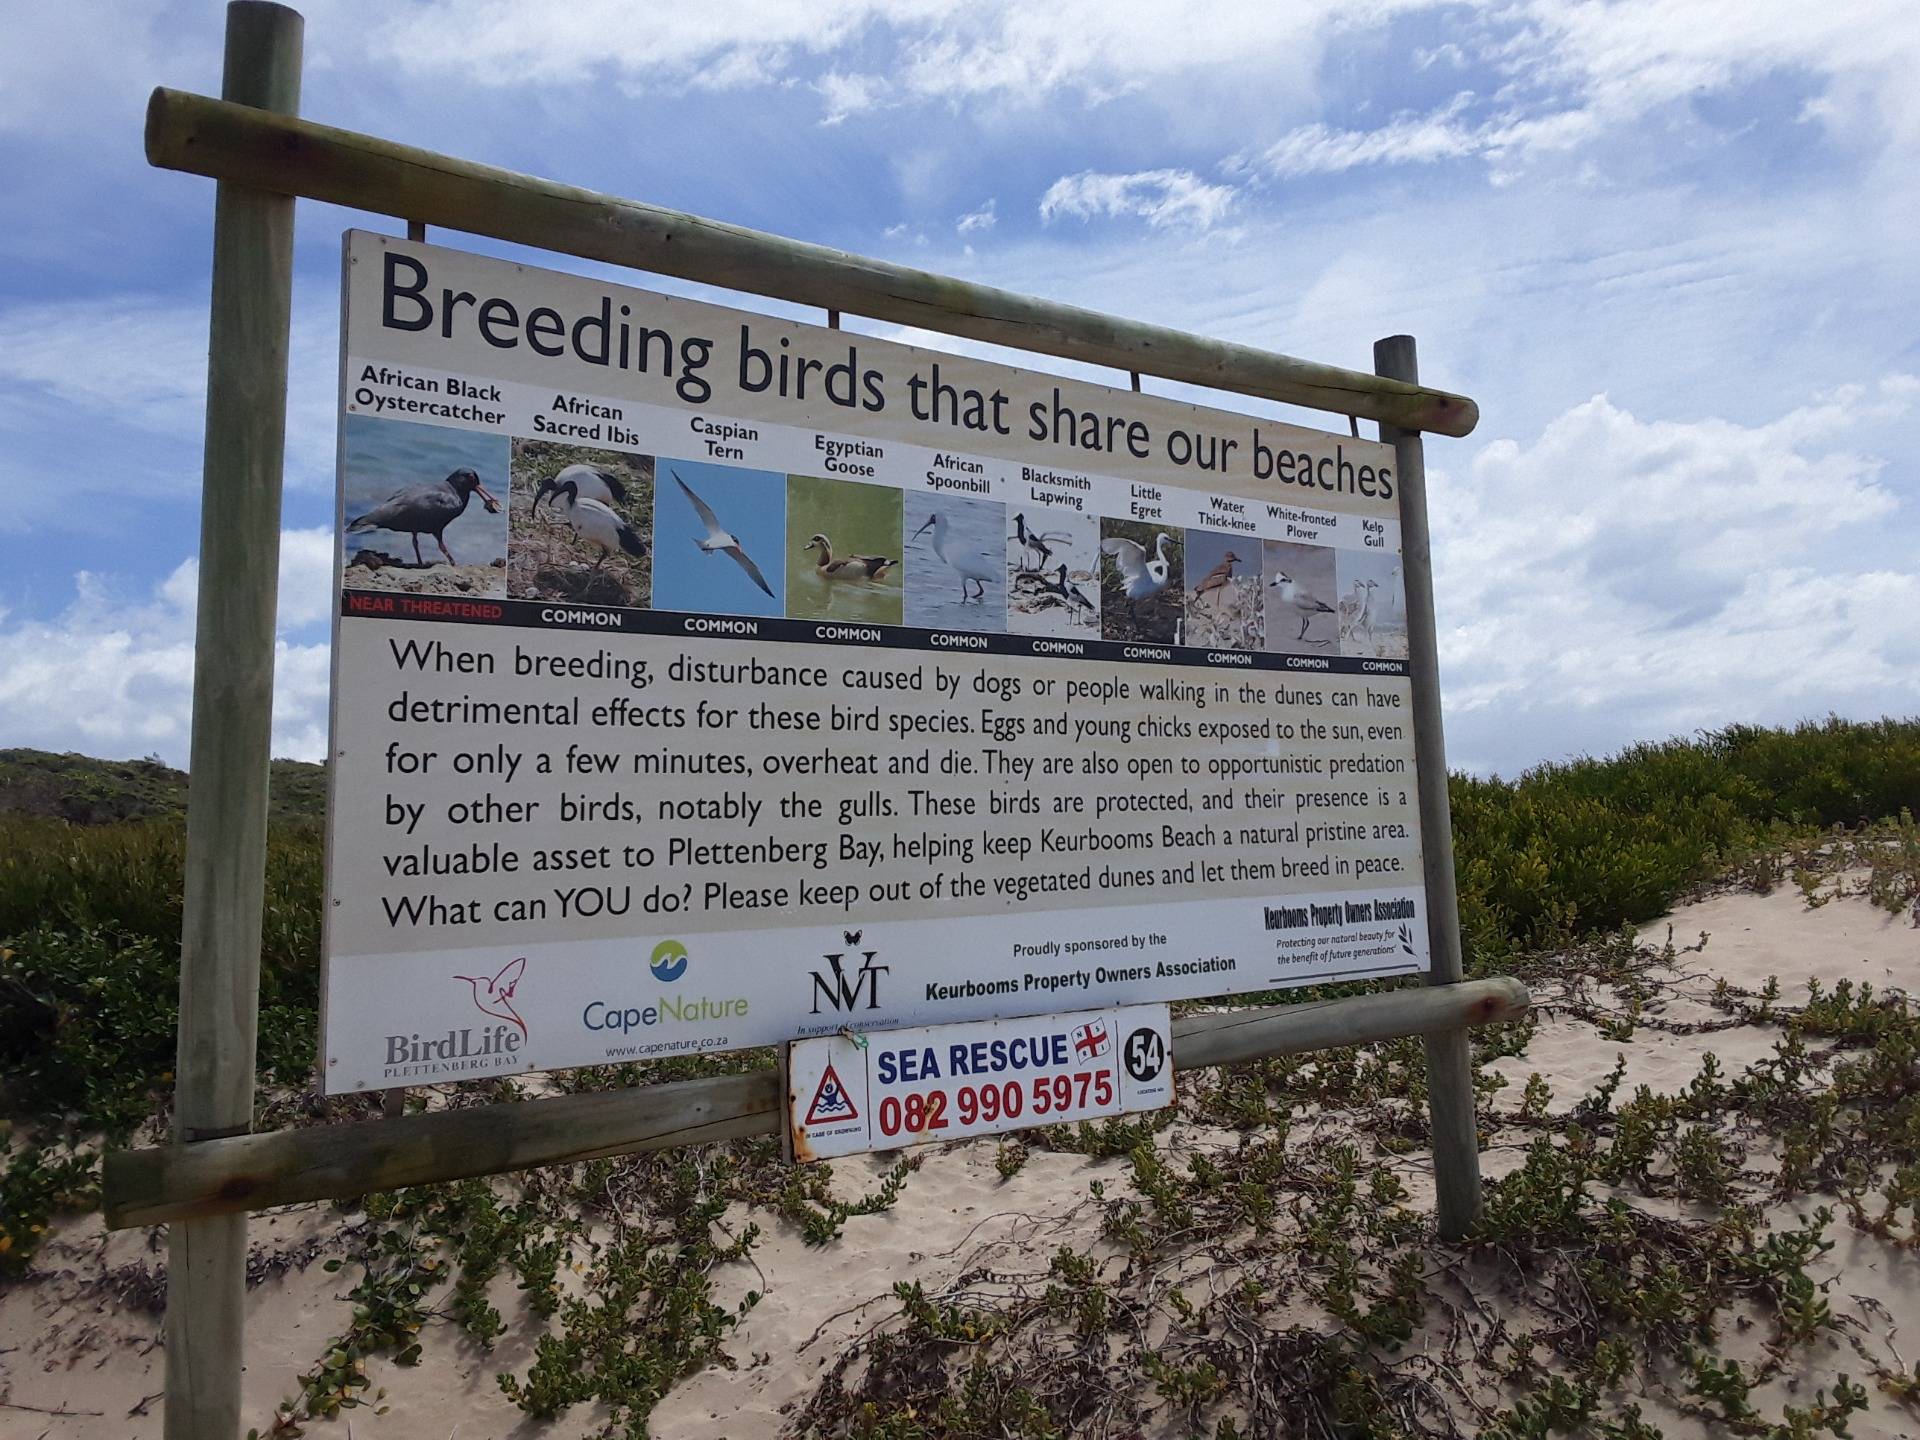 A list of the birds breeding on this long stretch of beach